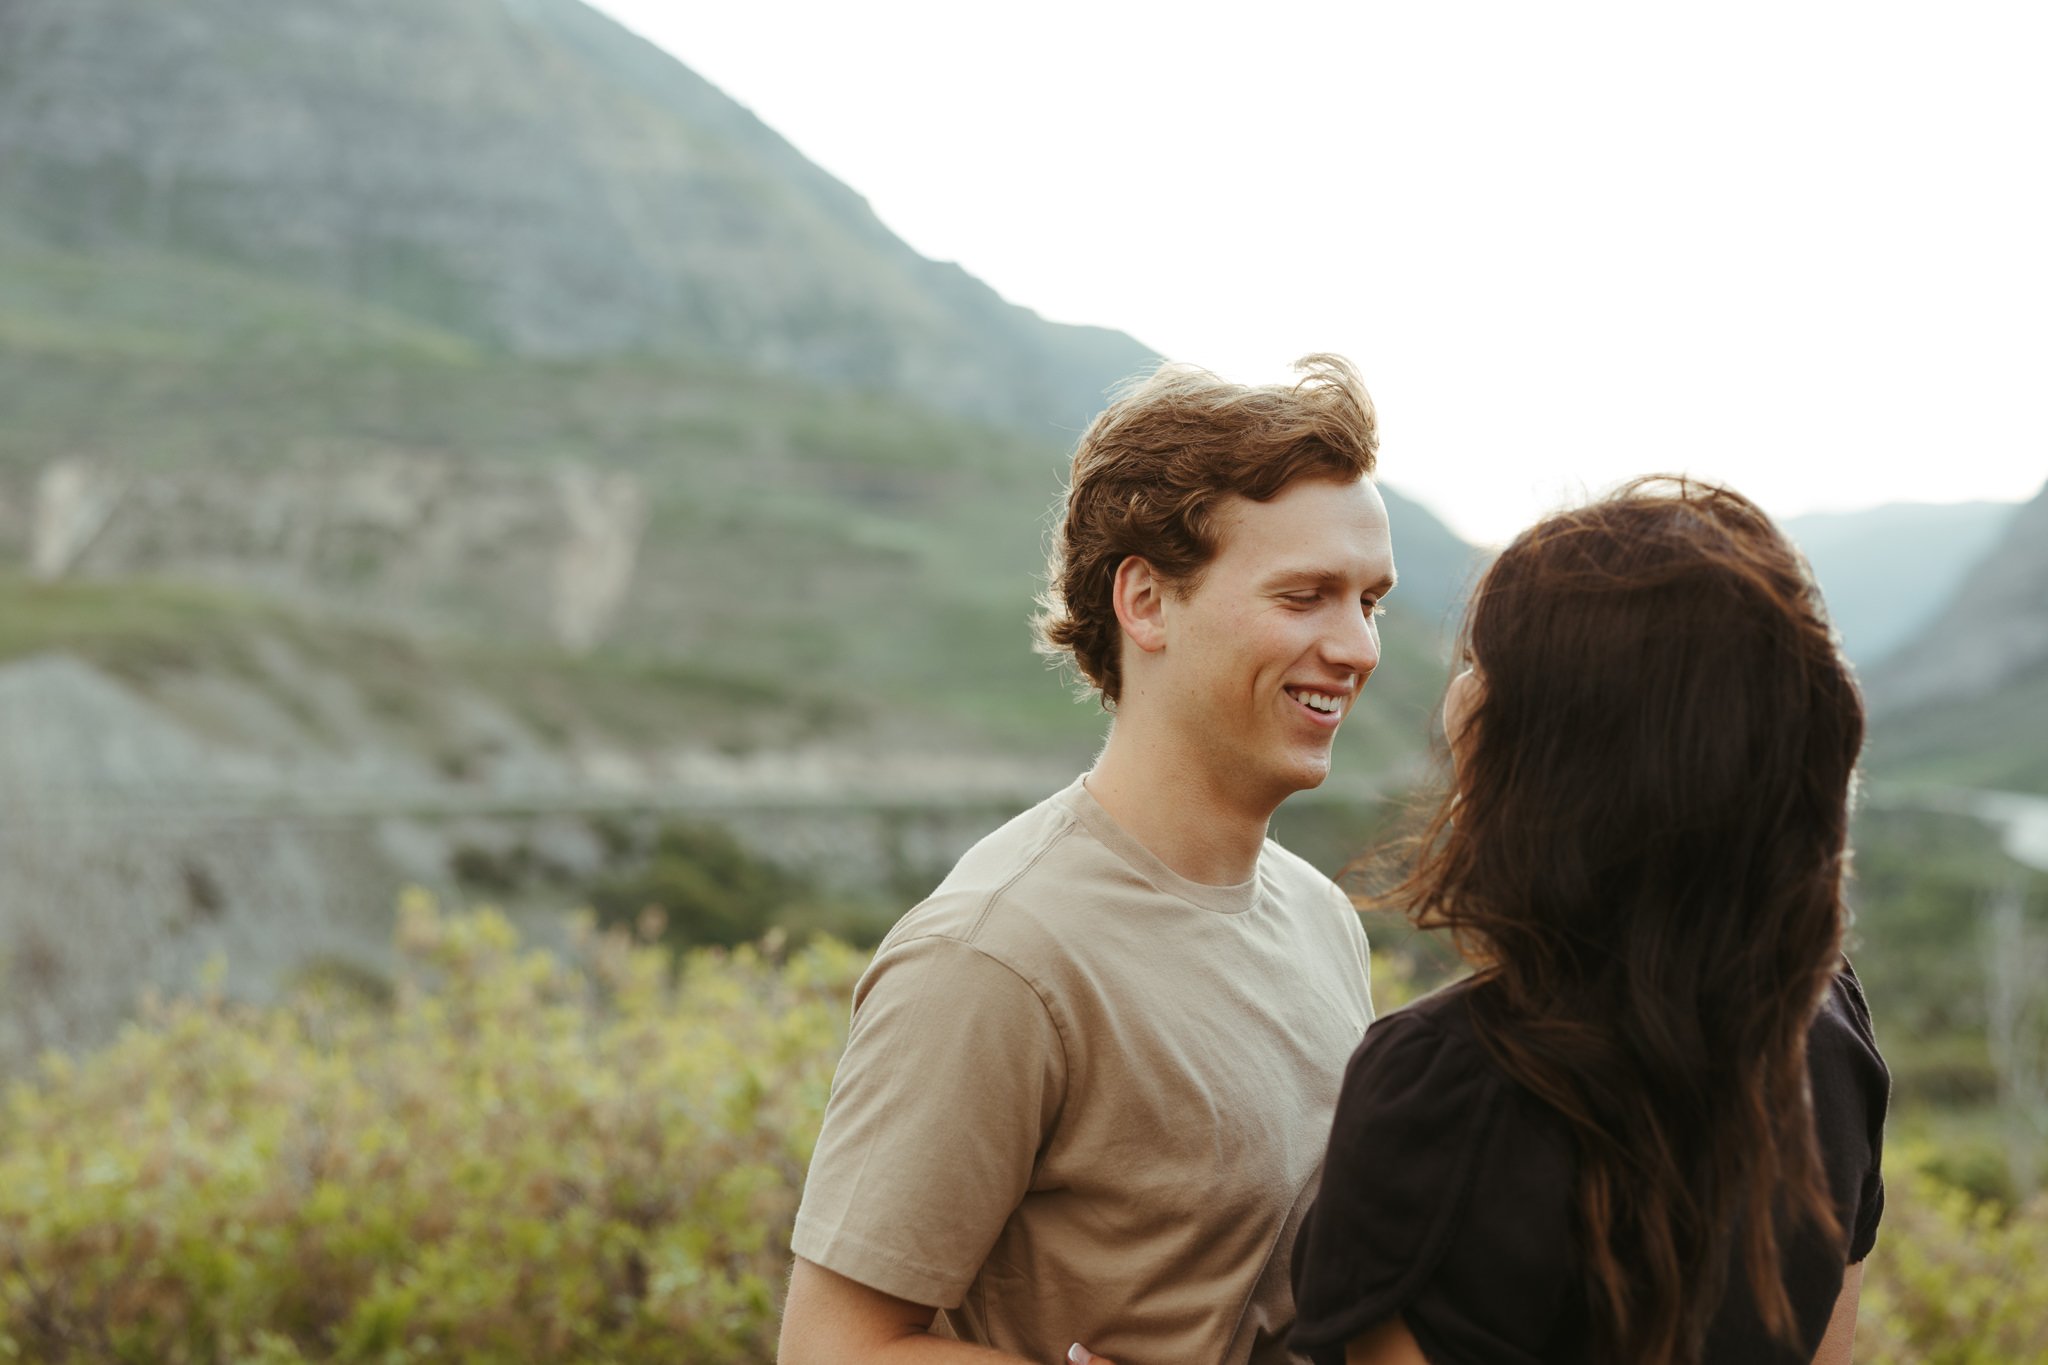 Spring-Provo-Canyon-Wildflowers-Engagement-Session-4